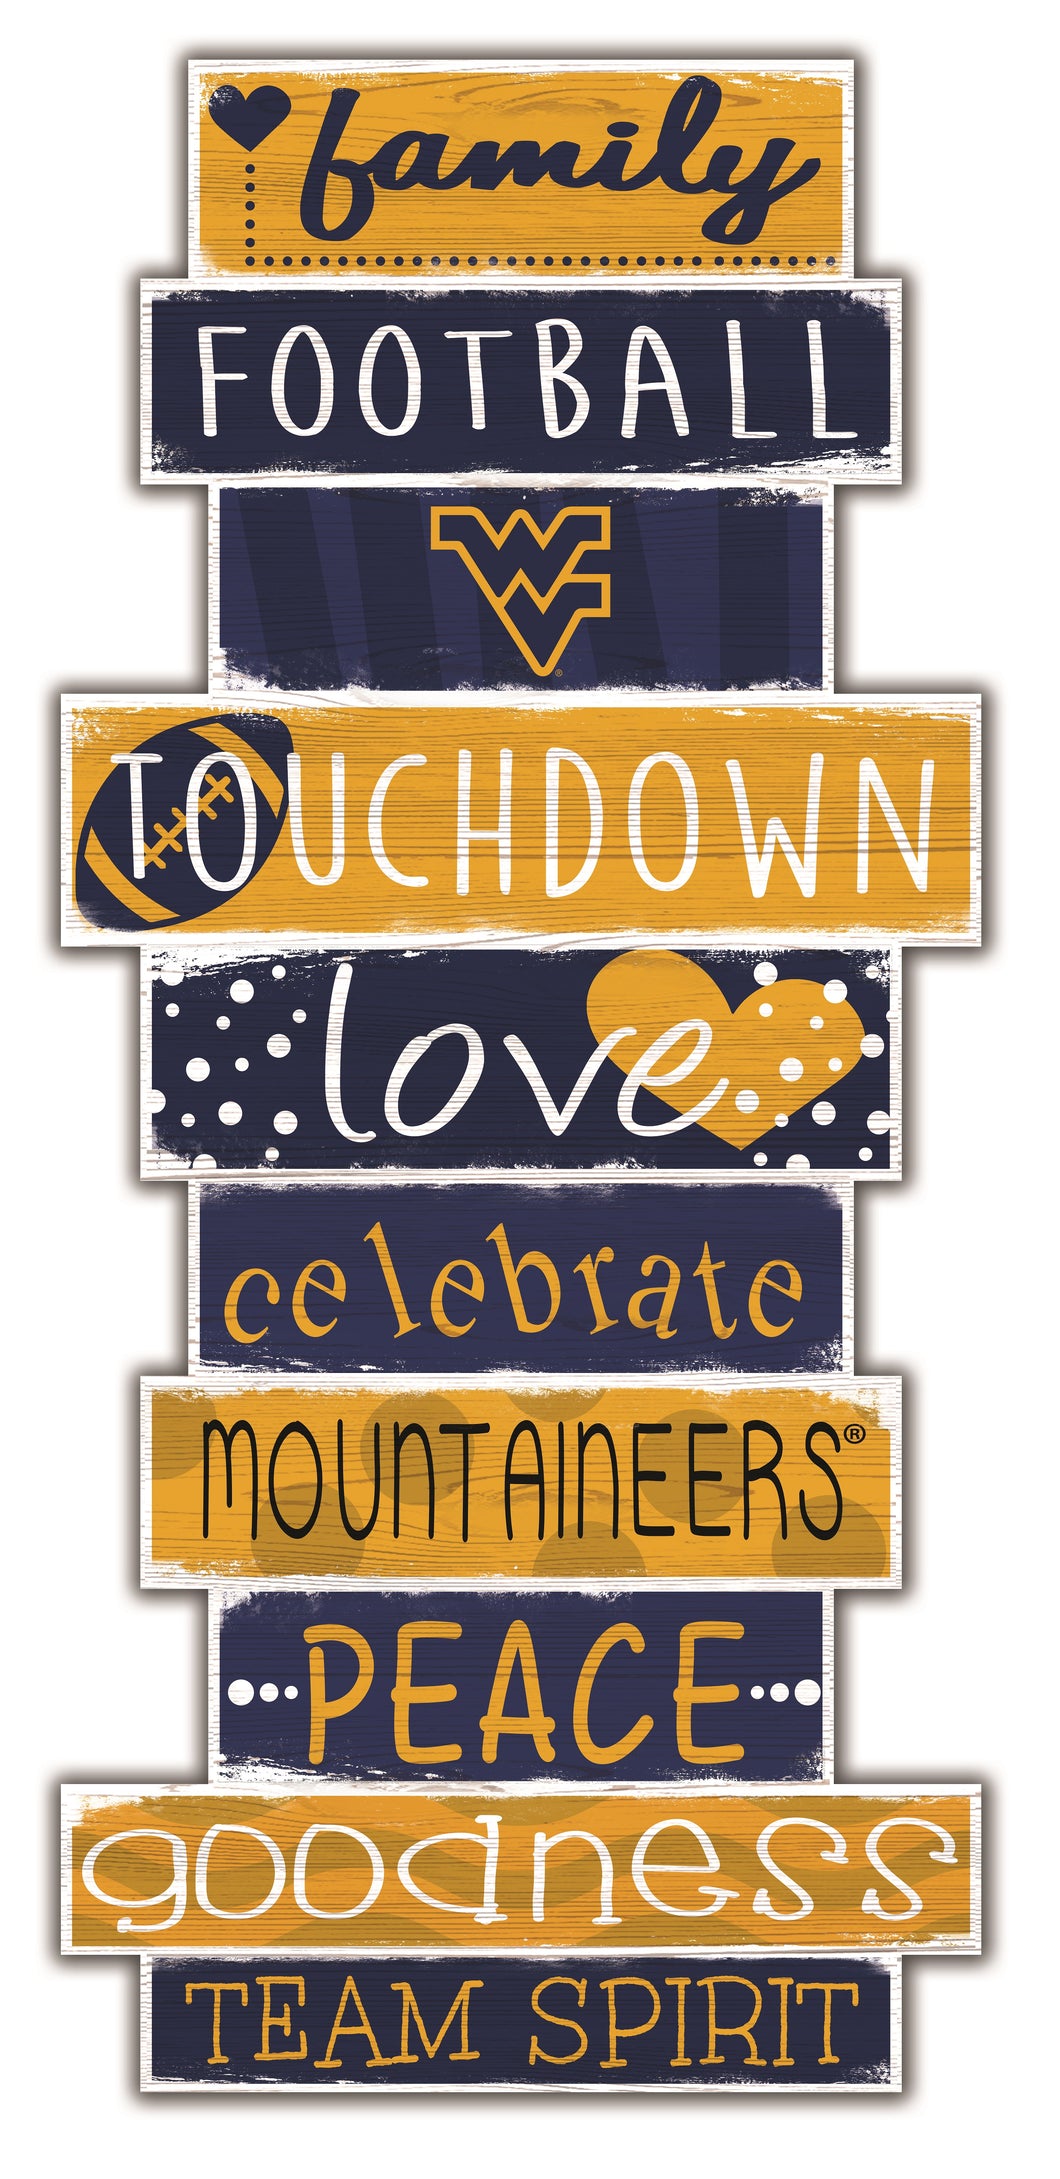 West Virginia Mountaineers Celebrations Stack Wood Sign -24